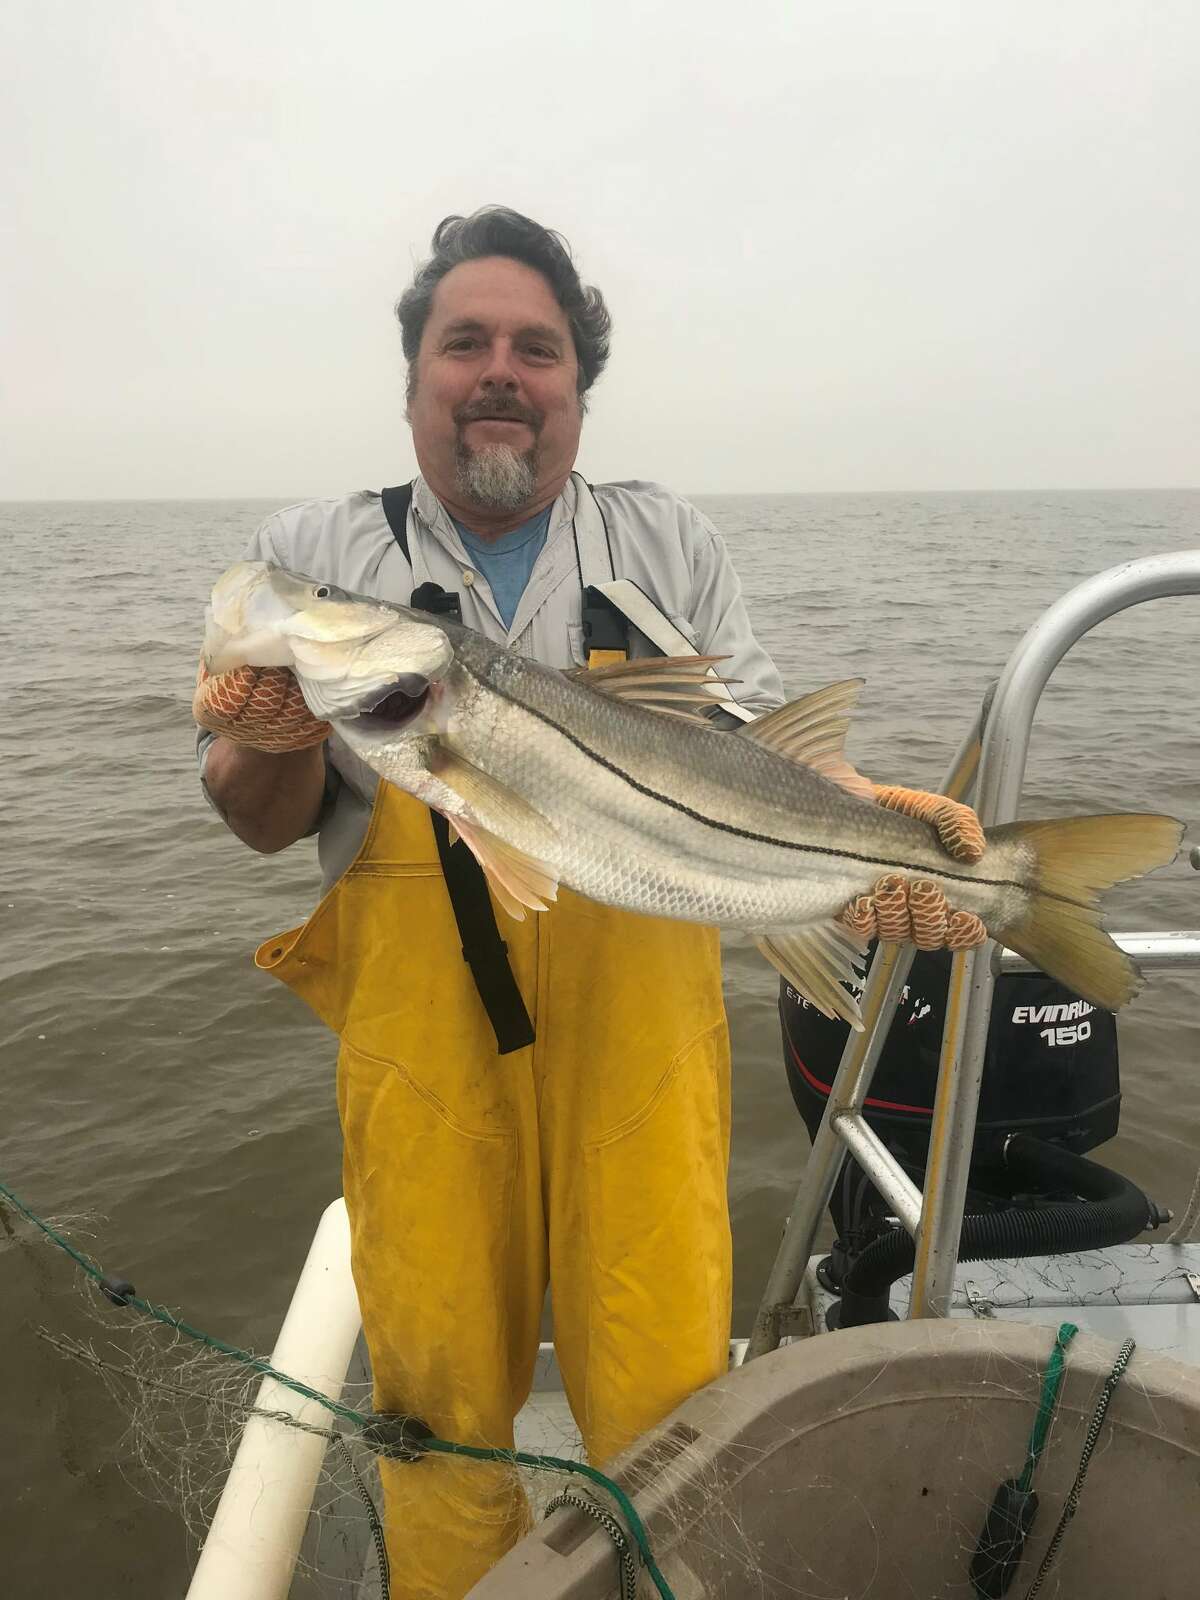 Snook, a tropical species long restricted to the lower Texas coast, appear to be expanding their range, Texas coastal fisheries sampling indicates. This large snook was one of several of these premier game fish caught, measured and released in the Matagorda Bay system during recent research.